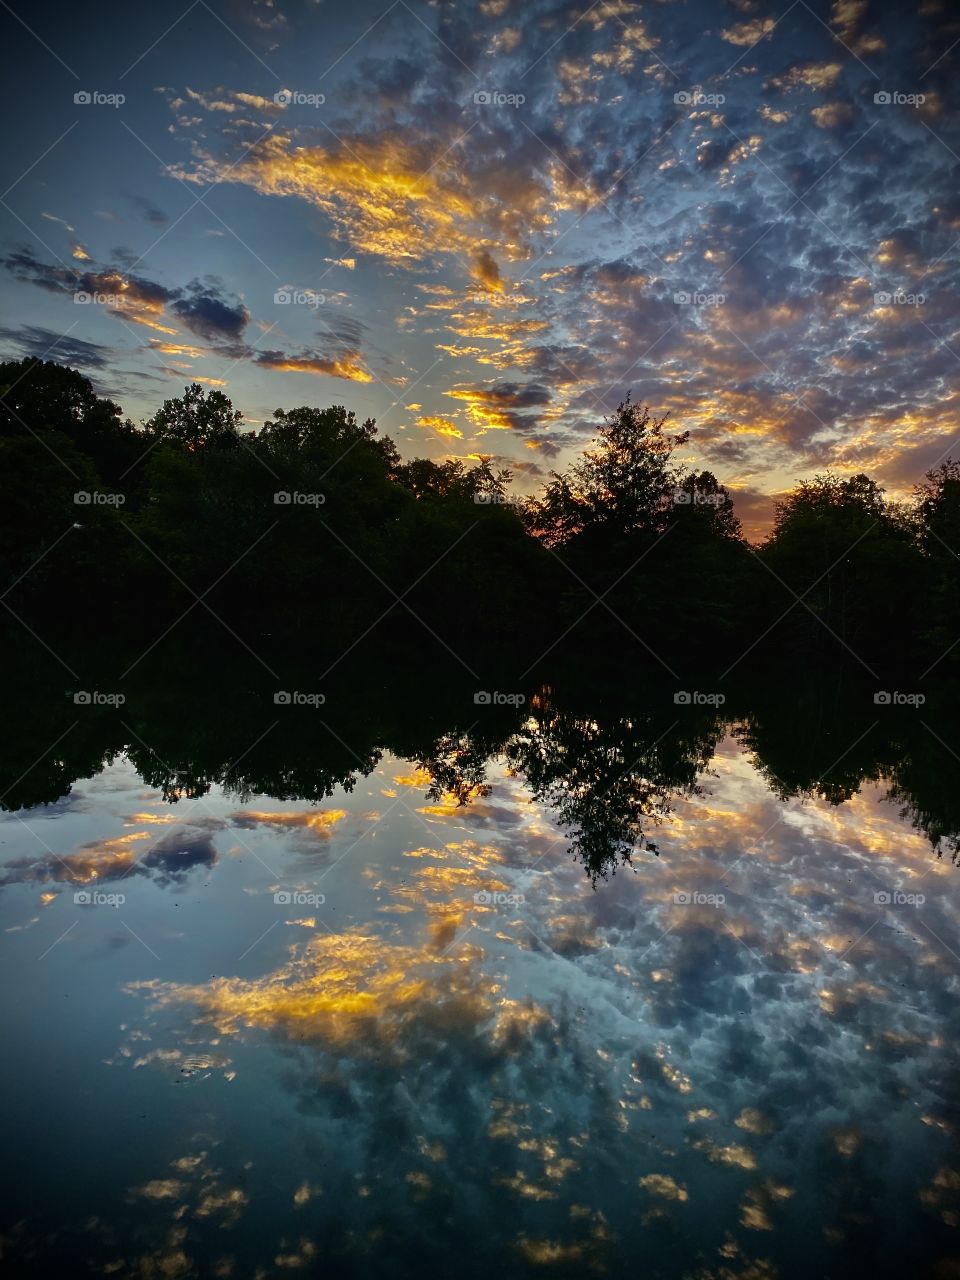 A stunning sunset shot with smooth glass like waters to reflect a perfect mirror image of a tree line silhouette with a matching sunset sky on the surface of the water. Accompanied with vibrant soothing warm and cool tones via some cloudscape.